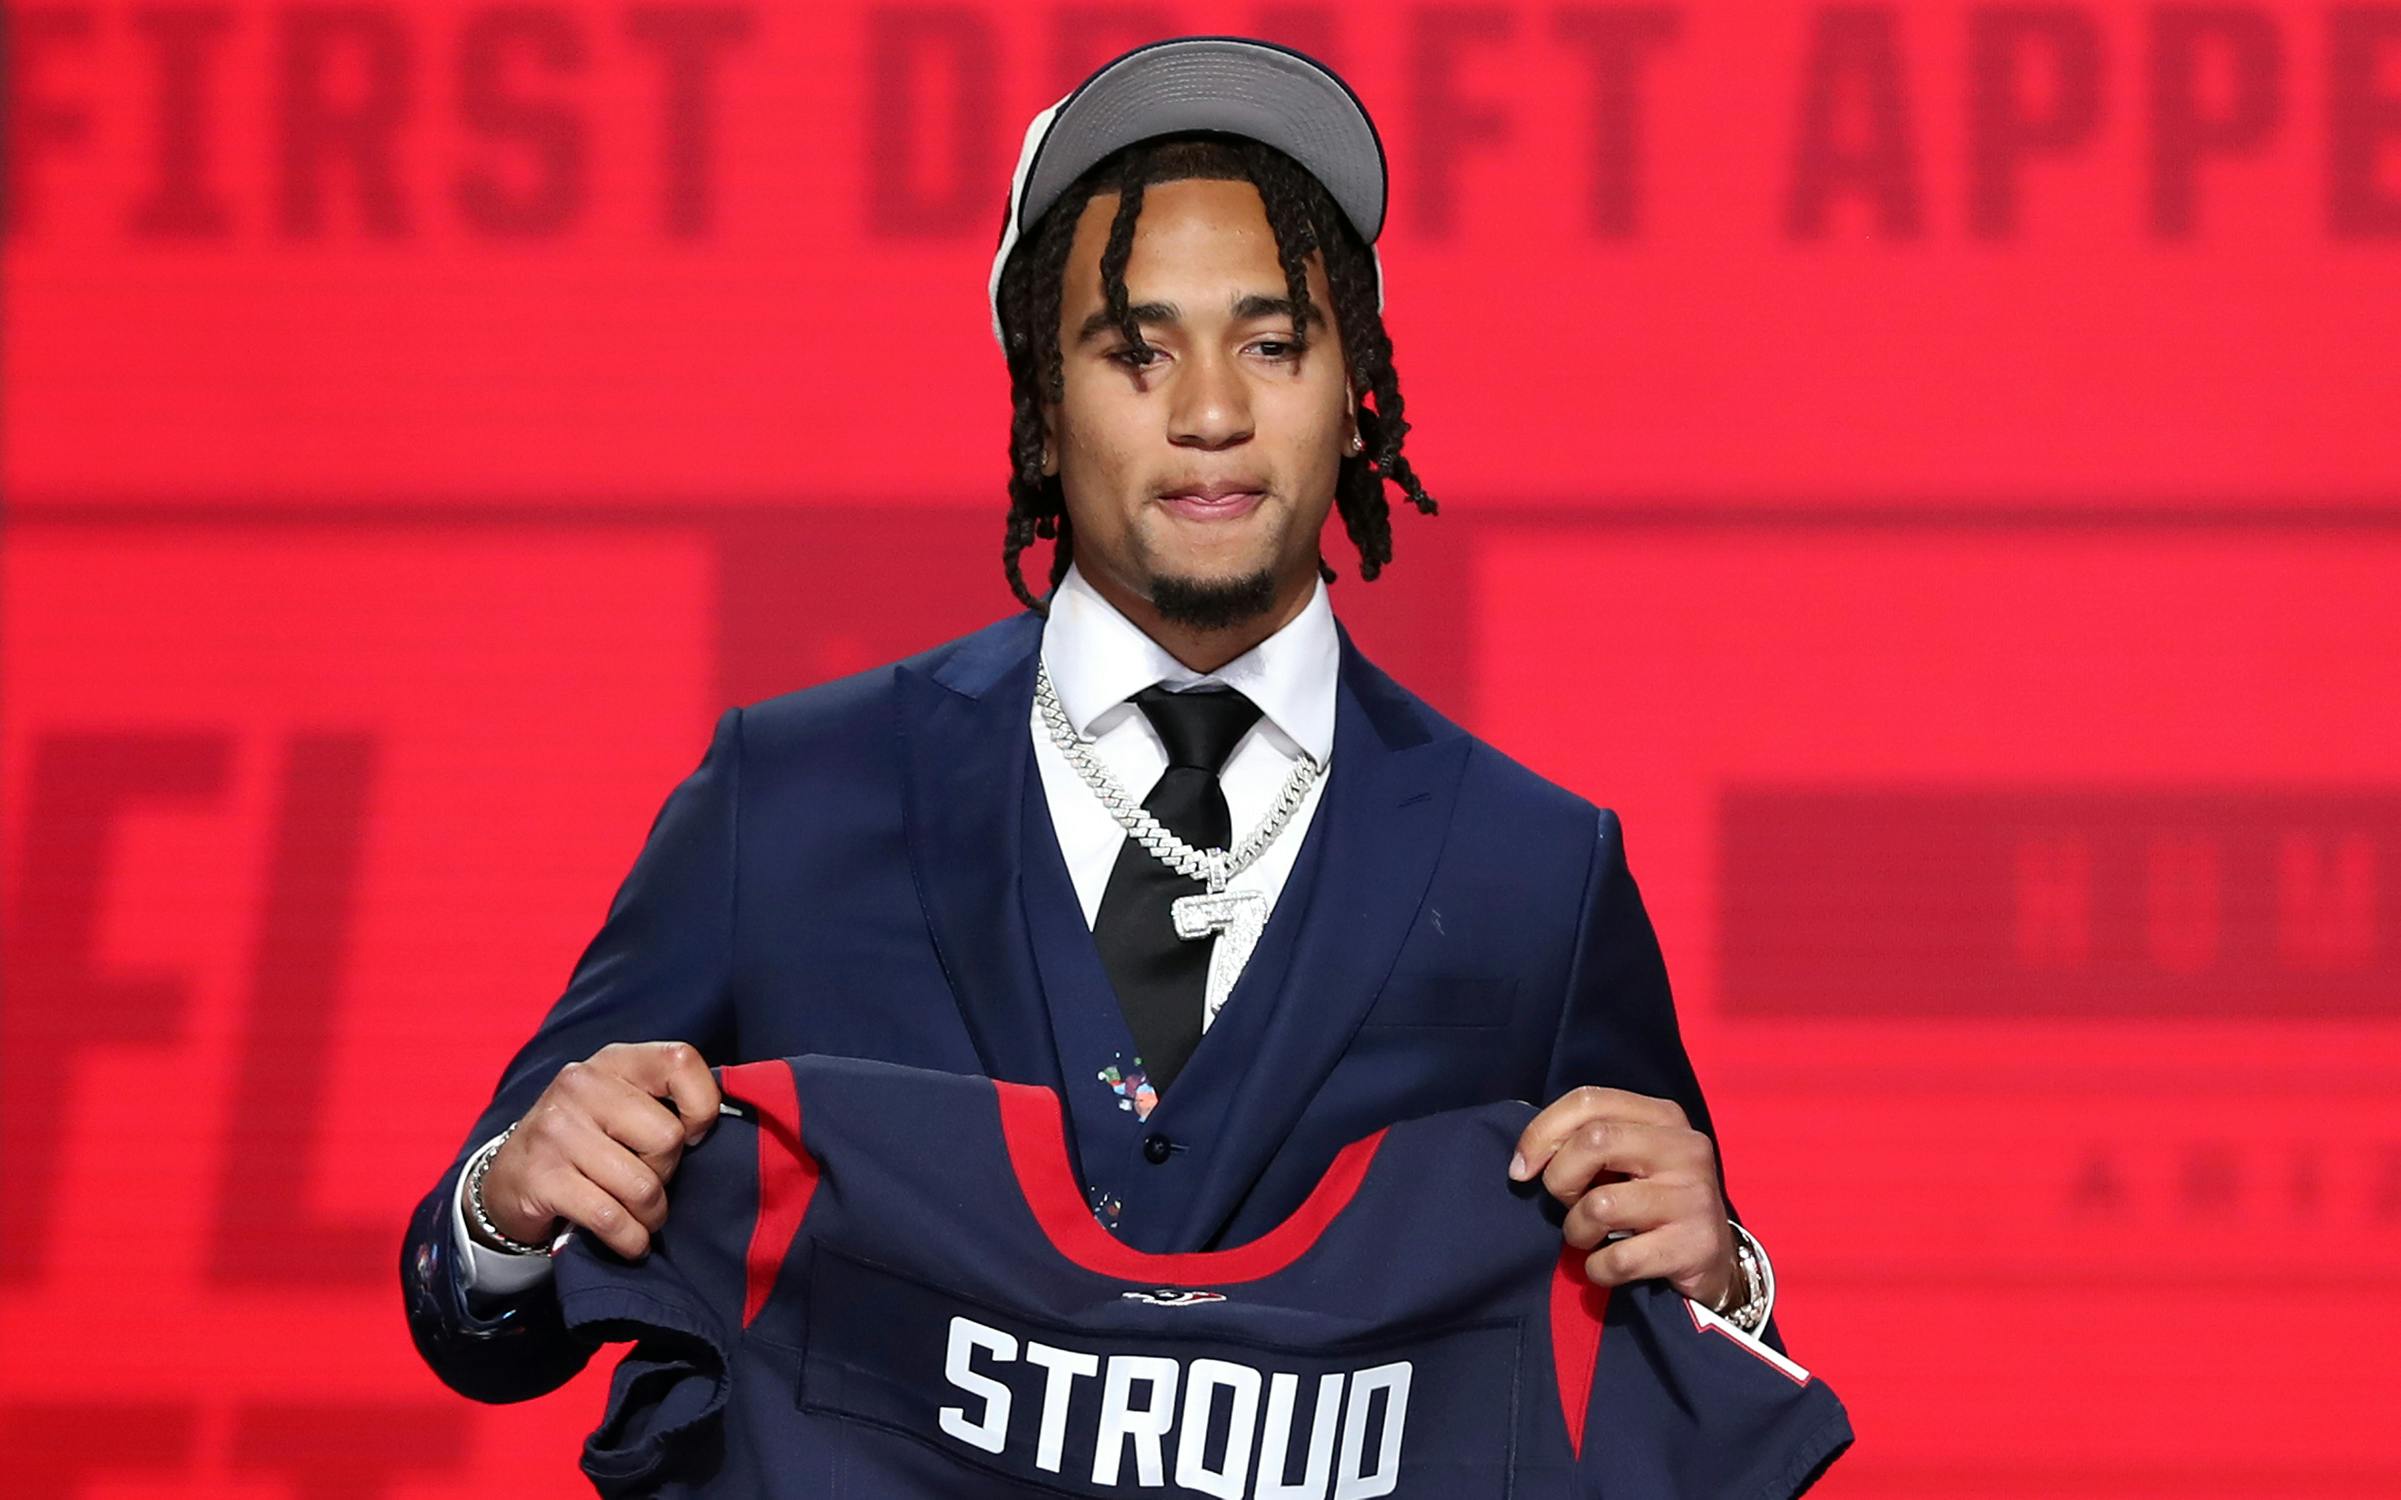 2023 NFL draft: Where would the Texans pick in Round 1?